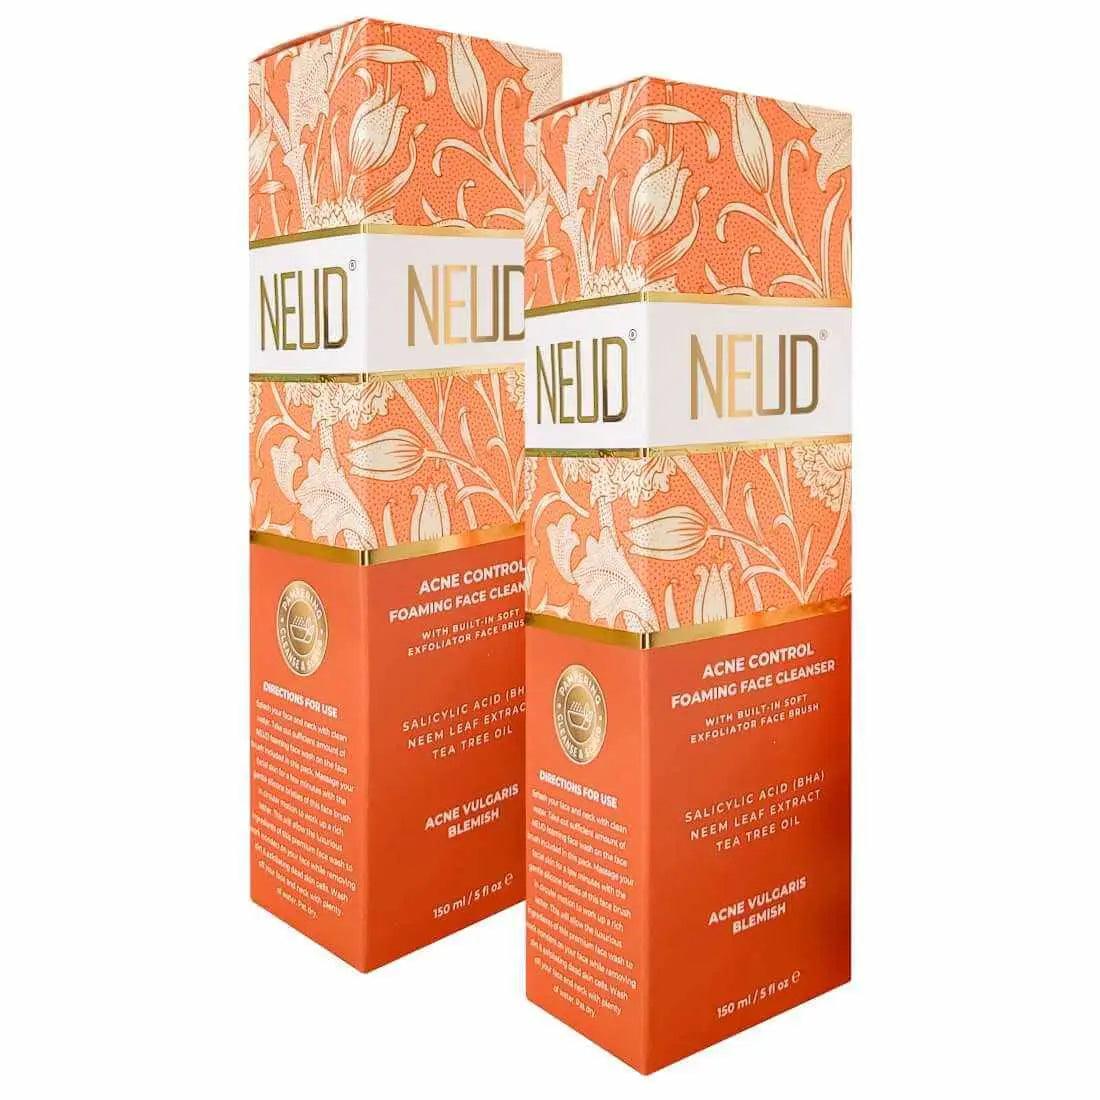 NEUD Acne Control Foaming Face Cleanser With Salicylic Acid, Neem and Tea Tree Oil - 150 ml 9559682308948